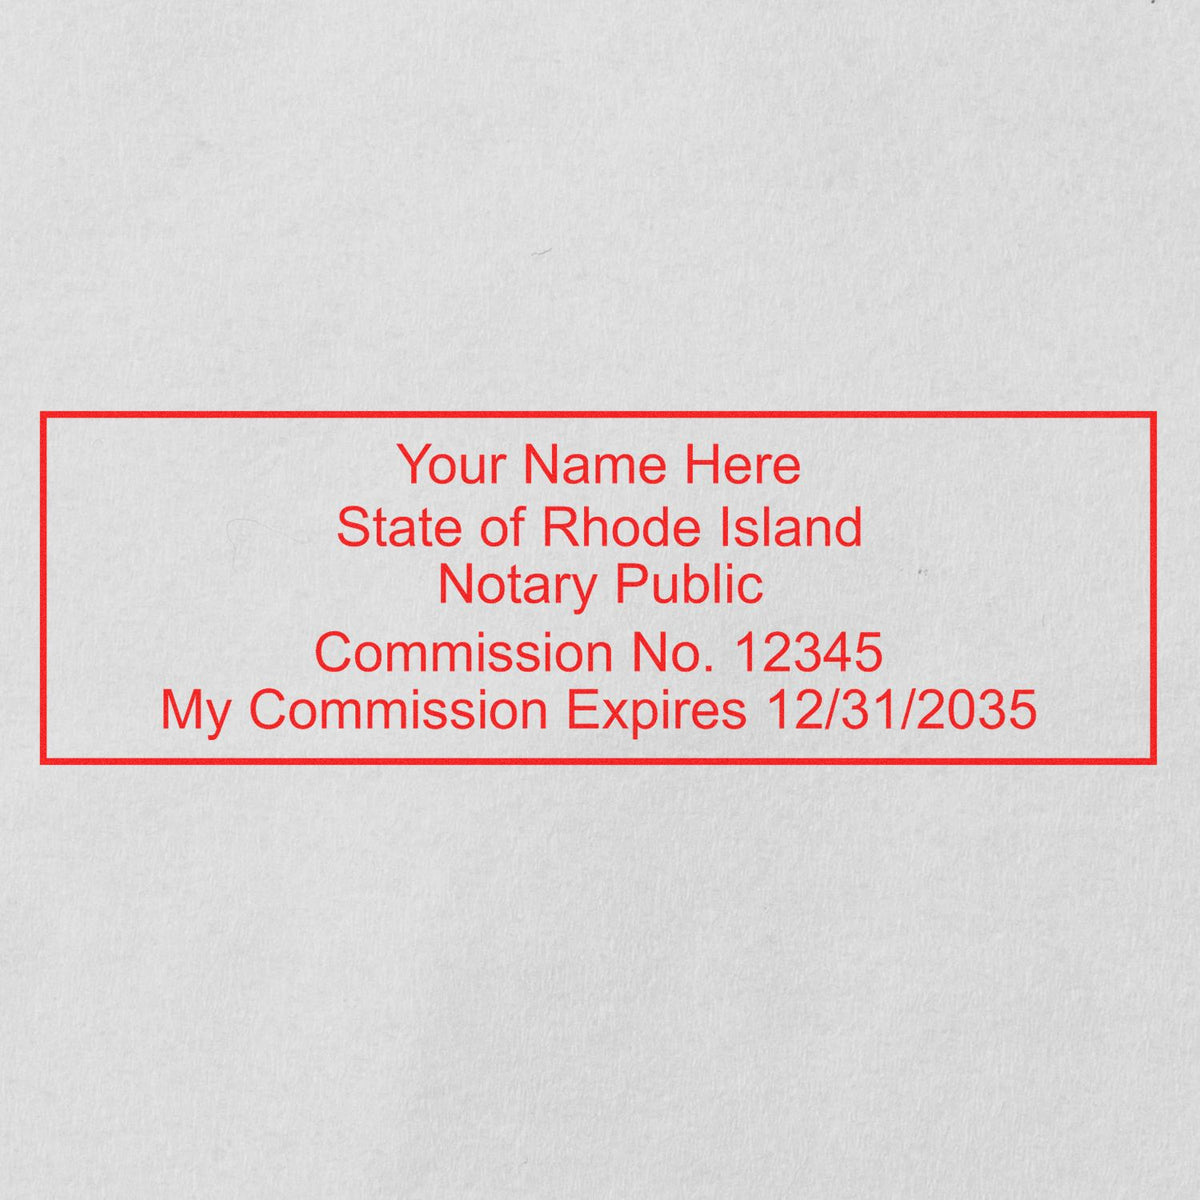 The Self-Inking Rectangular Rhode Island Notary Stamp stamp impression comes to life with a crisp, detailed photo on paper - showcasing true professional quality.